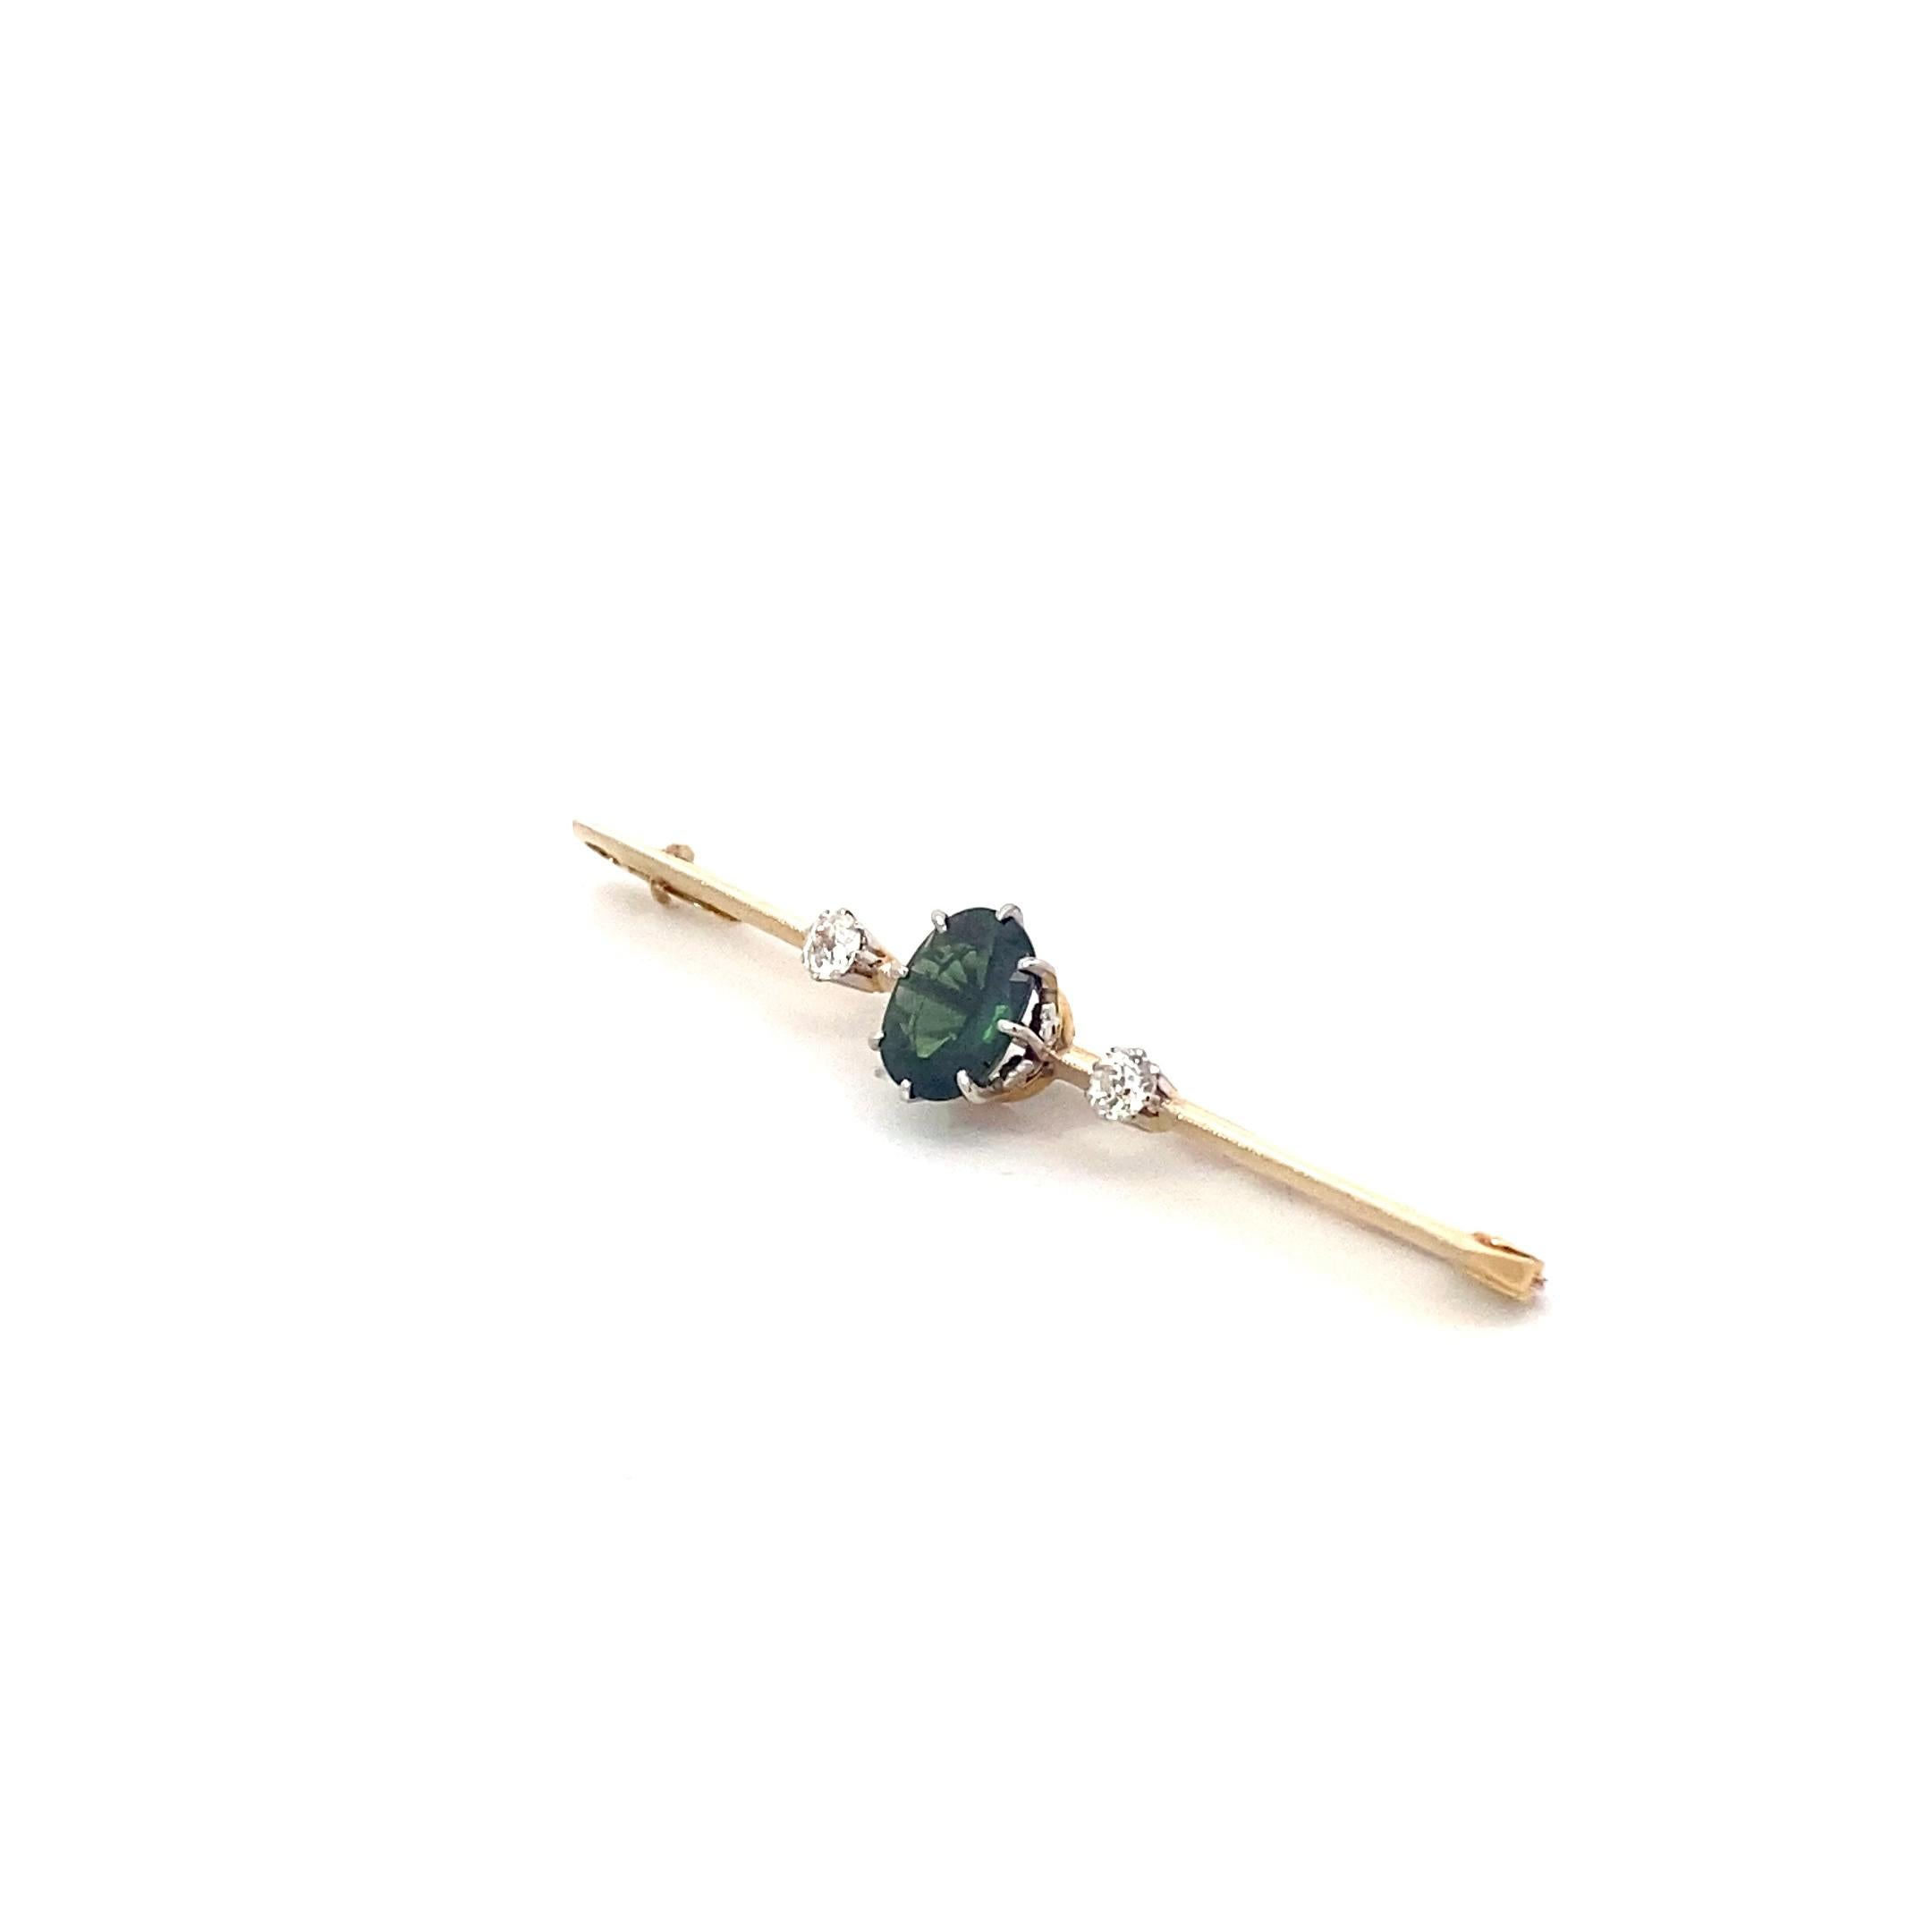 Featuring a whopping 2.3 carat green sapphire and two mine cut diamonds weighing 0.4 cts, this luxe 18k yellow gold brooch is emblematic of the clean lines and rich colors of mid-century fine jewelry. 

Over two inches long, this pin is sure to